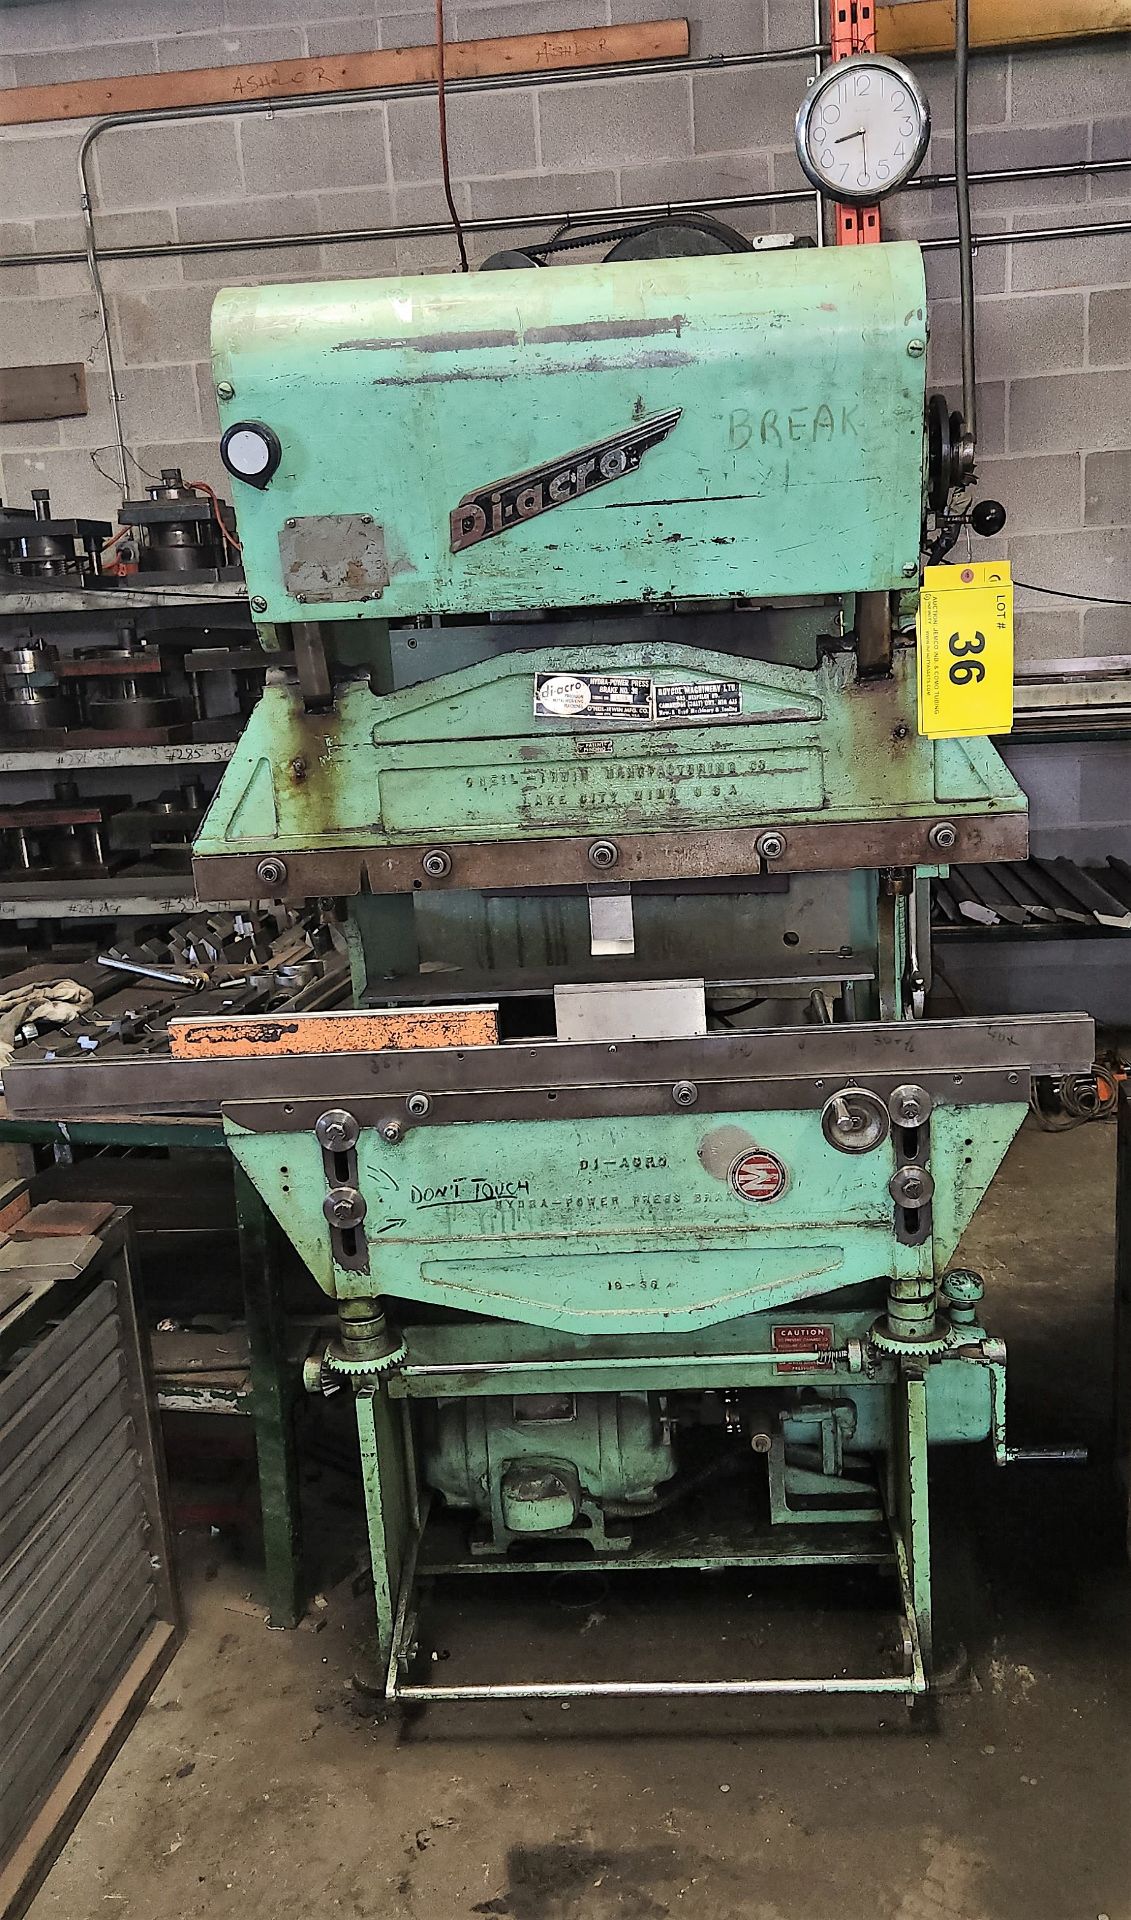 48" DI-ACRO HYDRA-POWER BRAKE PRESS, S/N 1159 (NOTE: SUBJECT TO LATE REMOVAL, PICKUP AFTER JULY